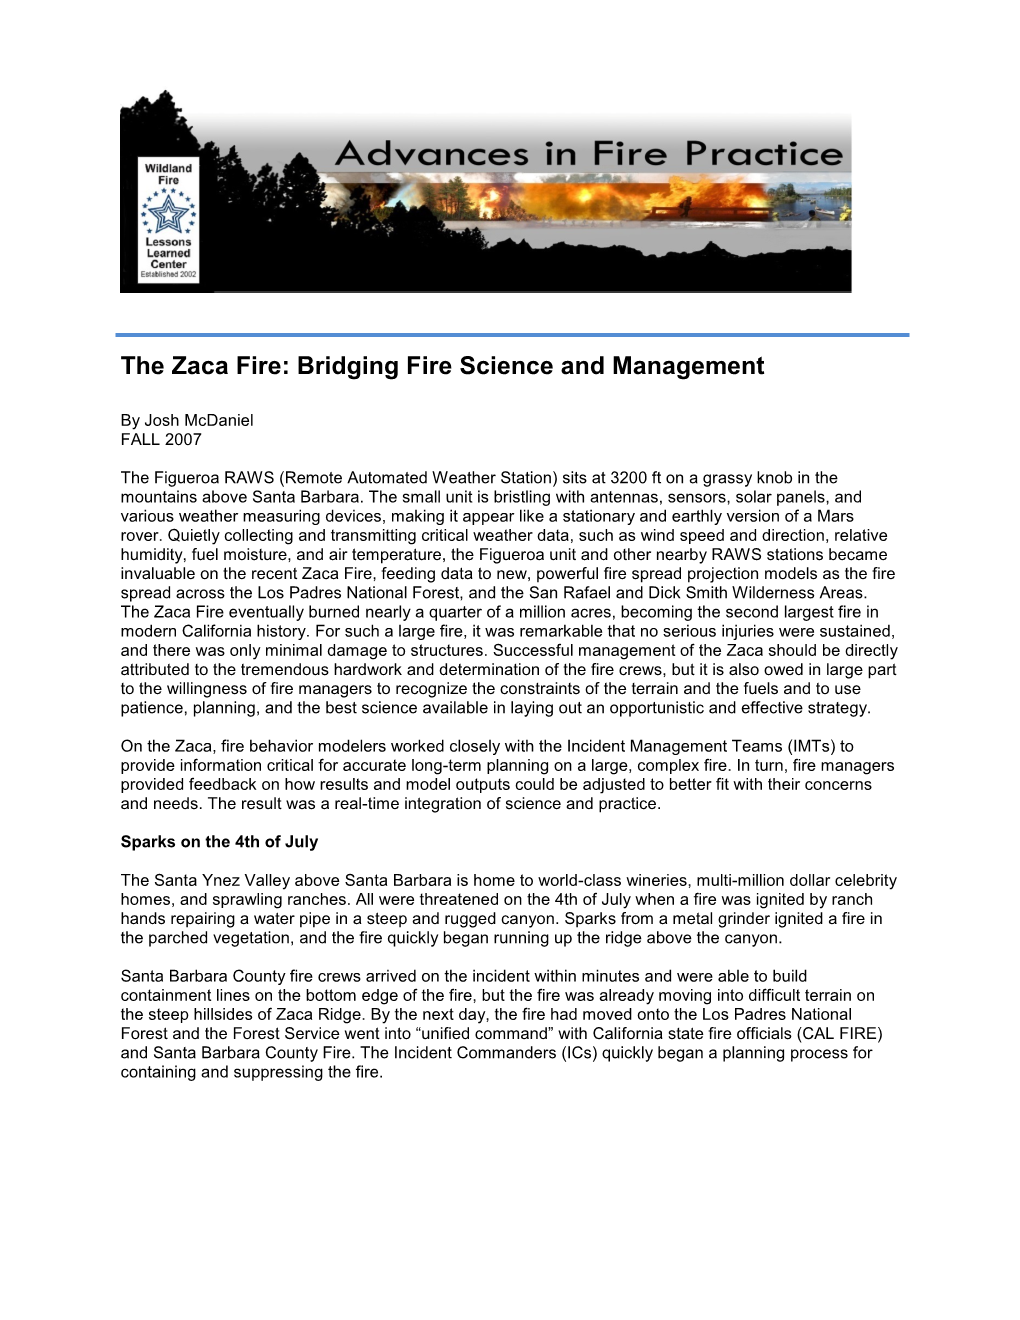 The Zaca Fire: Bridging Fire Science and Management